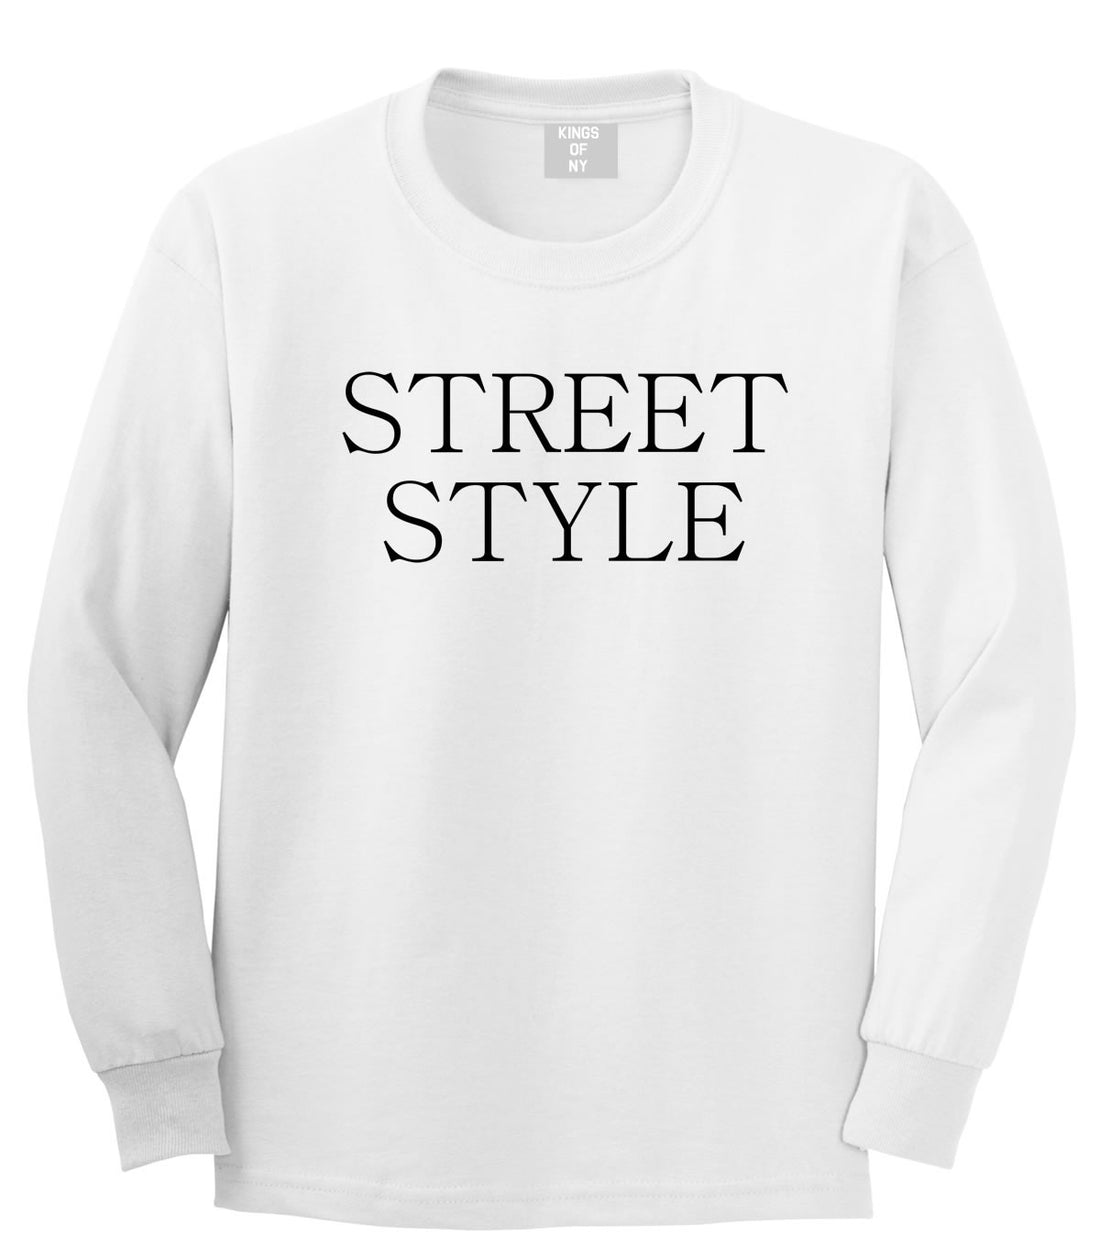 Street Style Photography Long Sleeve T-Shirt in White by Kings Of NY